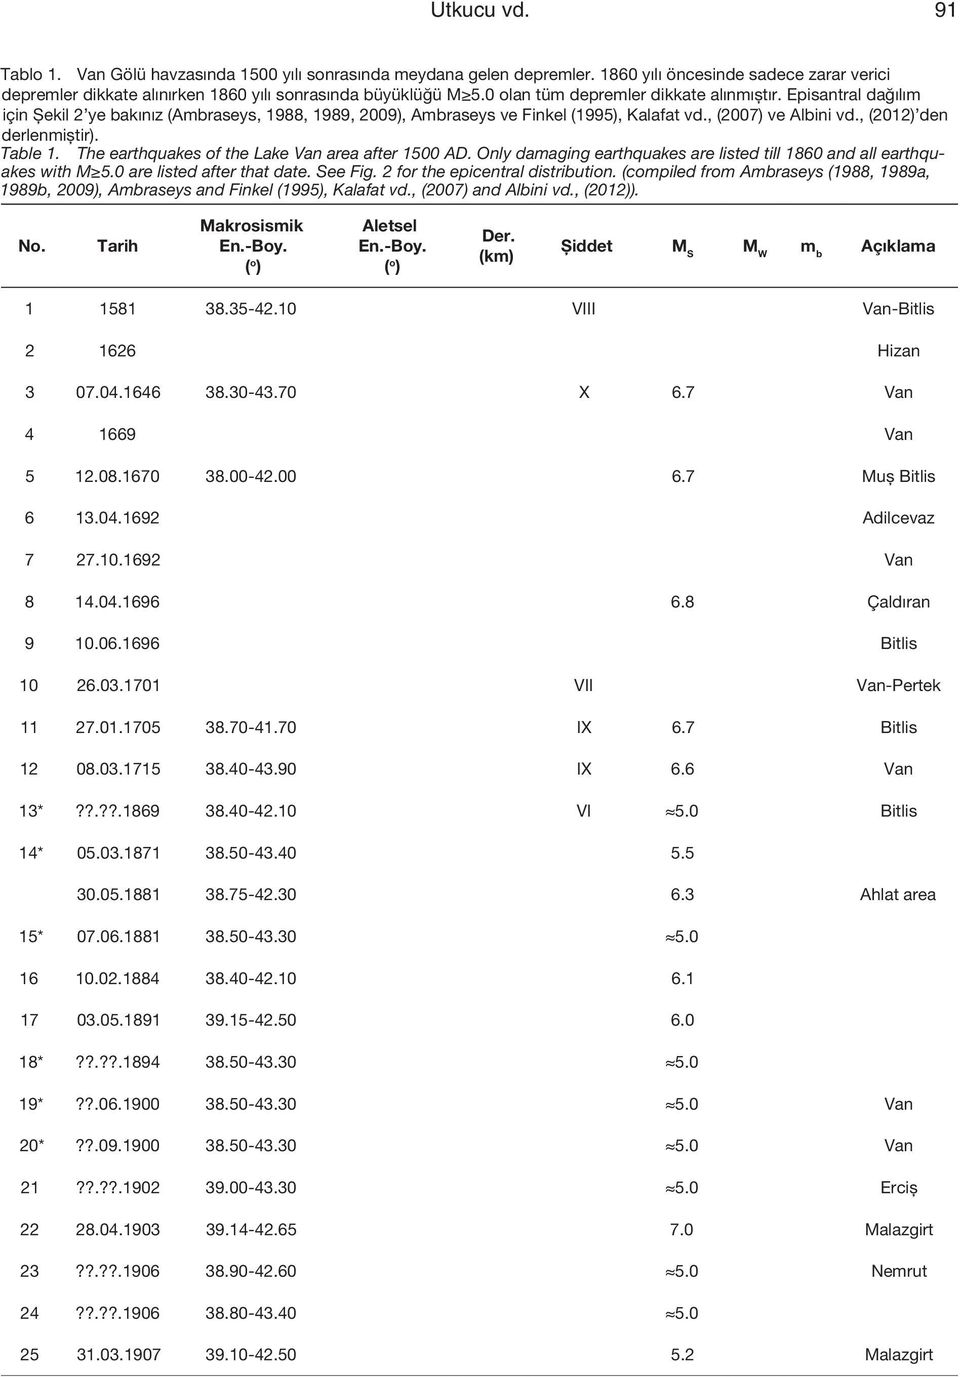 , (2012) den derlenmiştir). Table 1. The earthquakes of the Lake Van area after 1500 AD. Only damaging earthquakes are listed till 1860 and all earthquakes with M 5.0 are listed after that date.